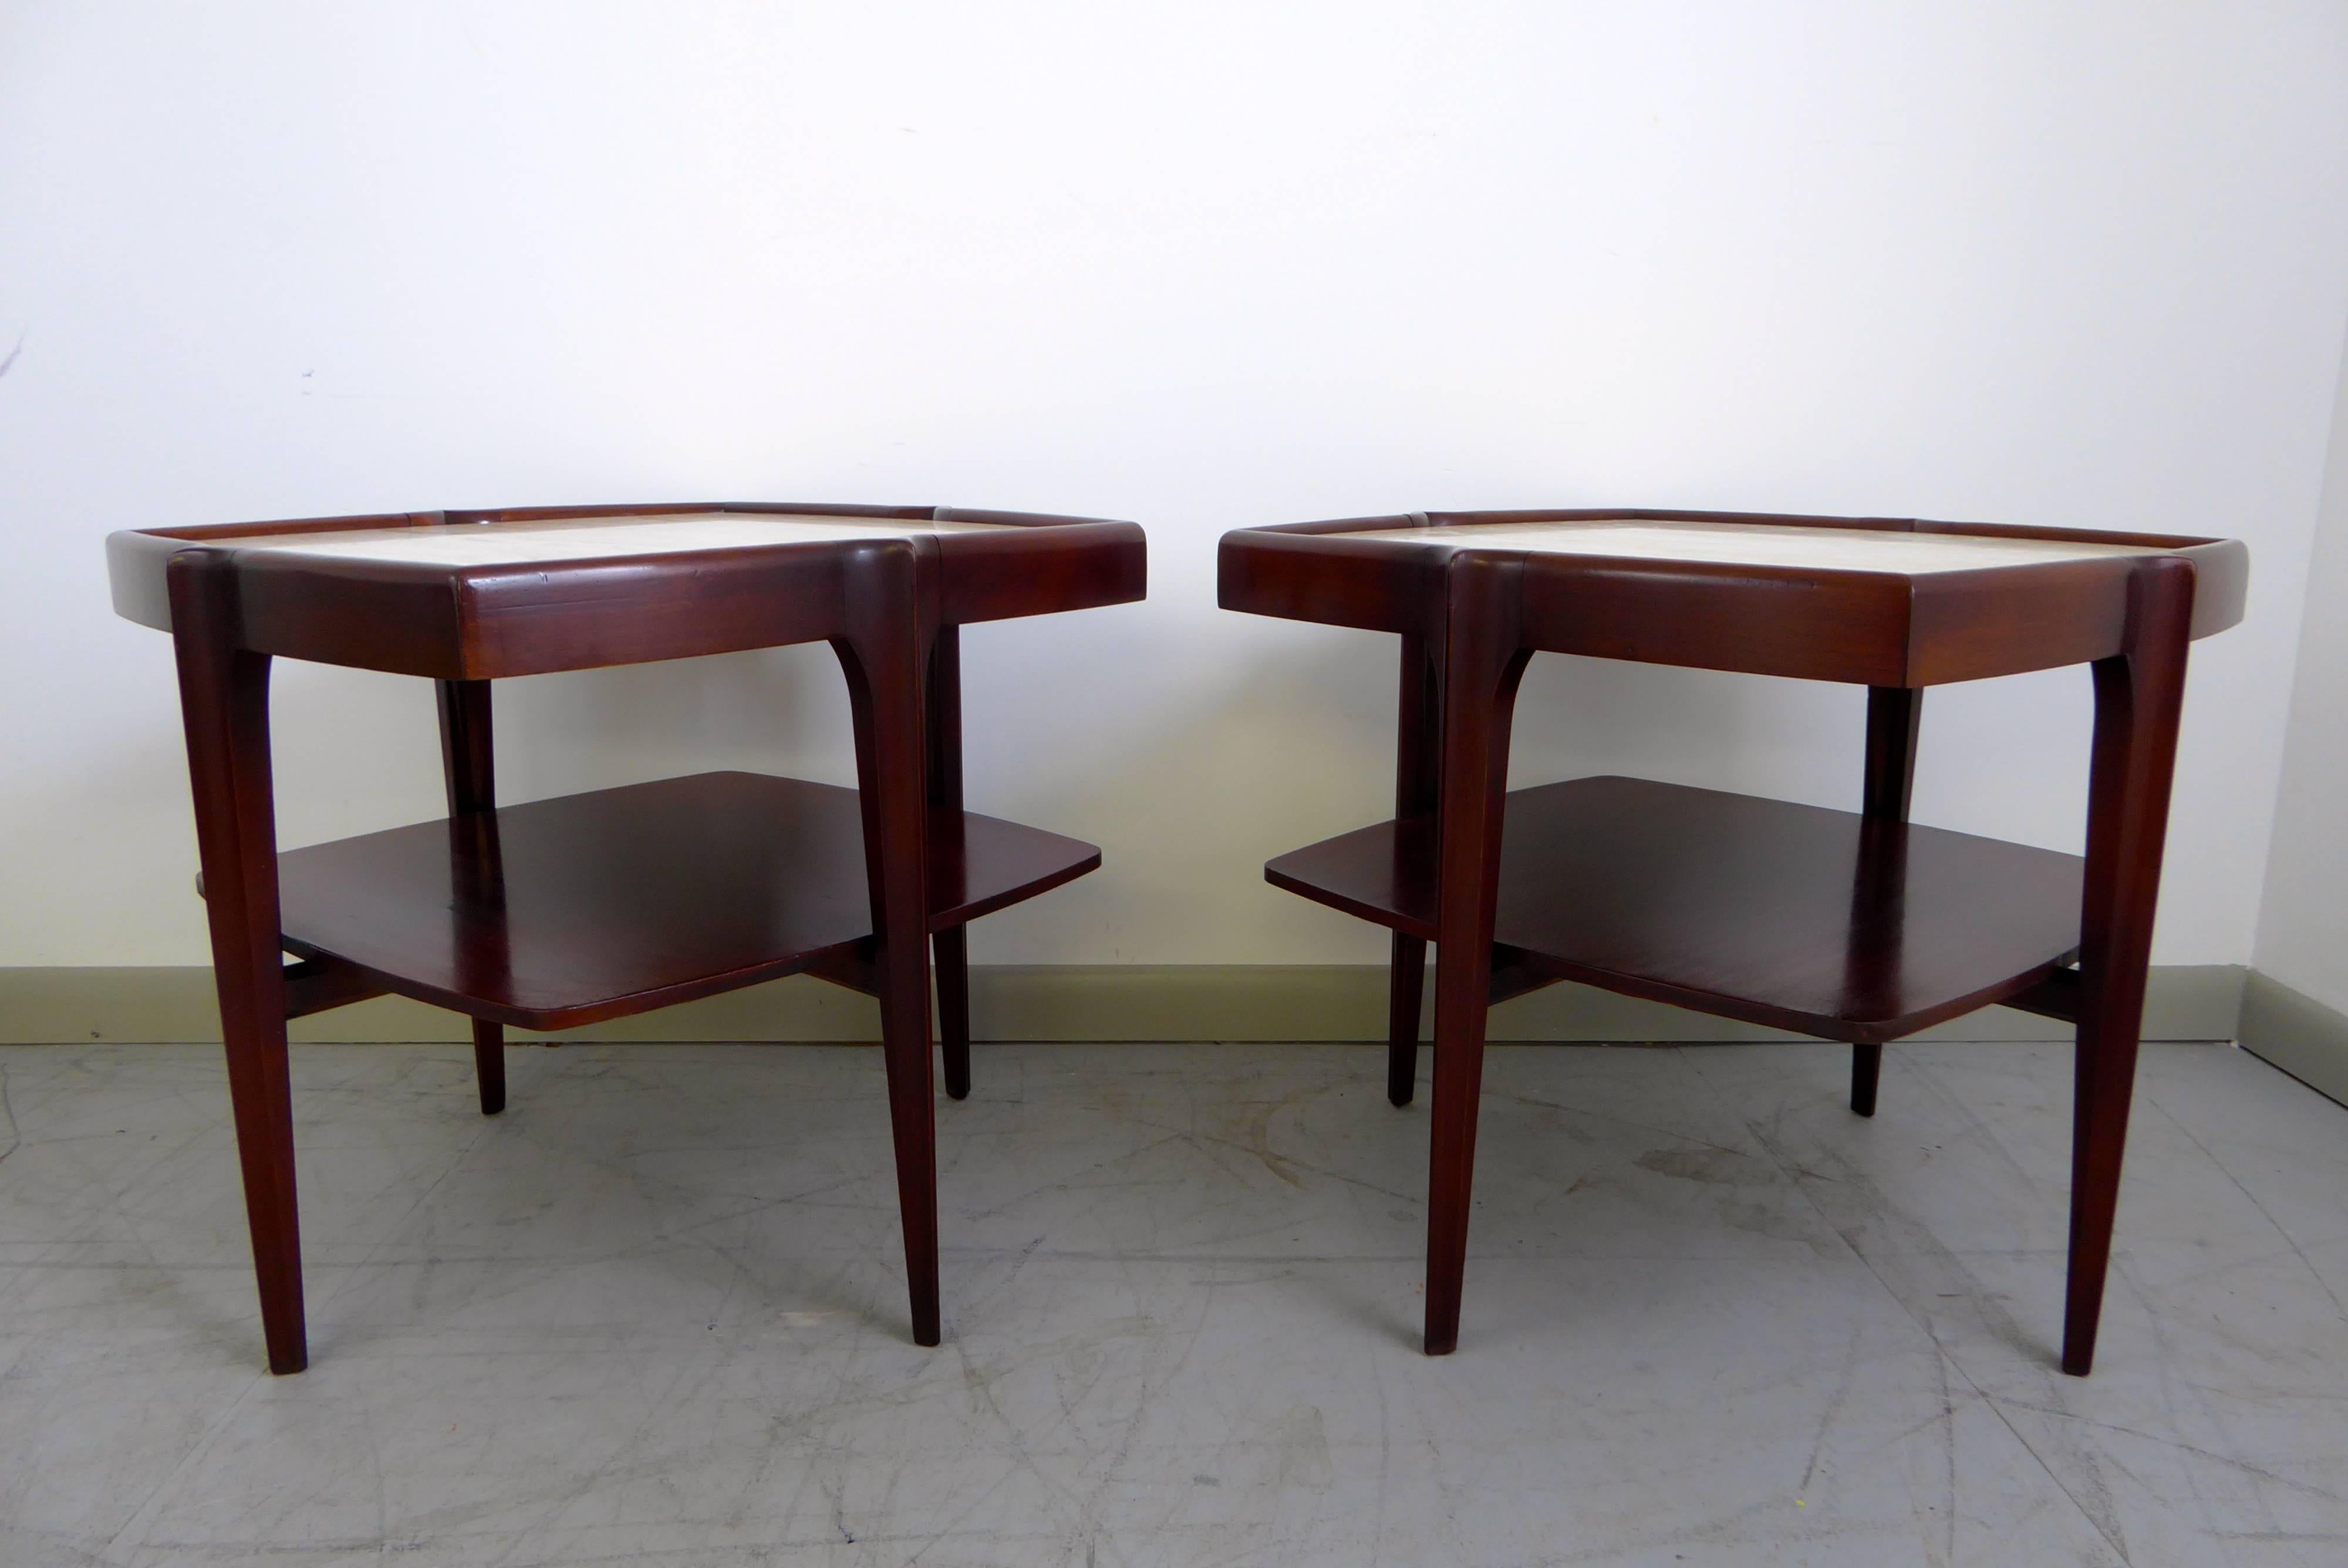 Beautiful pair of mahogany and Italian travertine side tables in the manner of Bertha Schaefer, circa 1960s. Professionally refinished. Stunning detail and design.